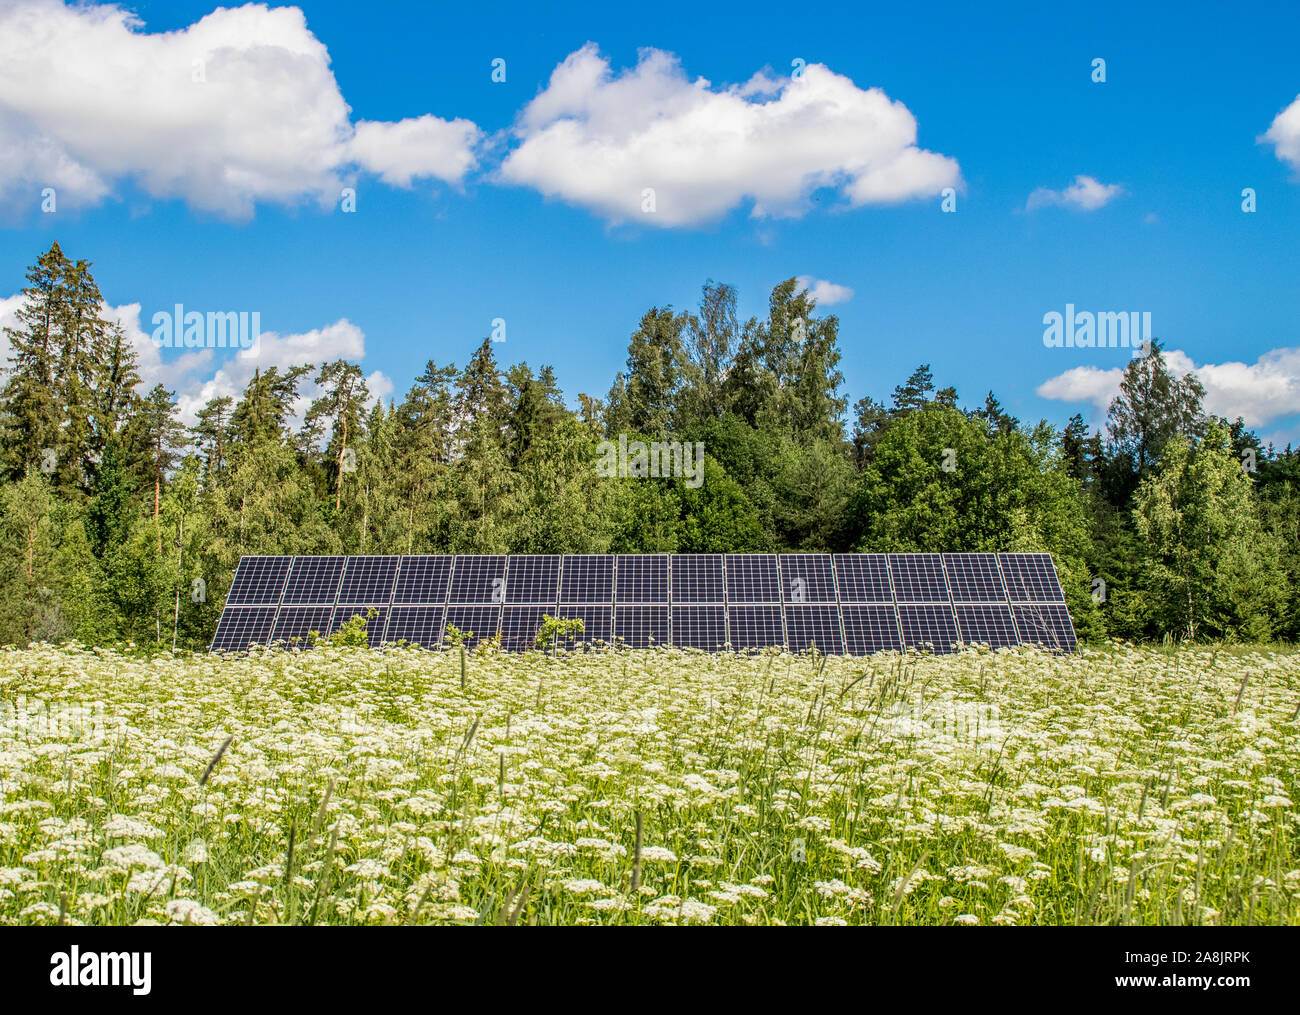 Small solar energy farm on beautiful natural meadow in nature. Renewable energy concept. Room for text. Stock Photo